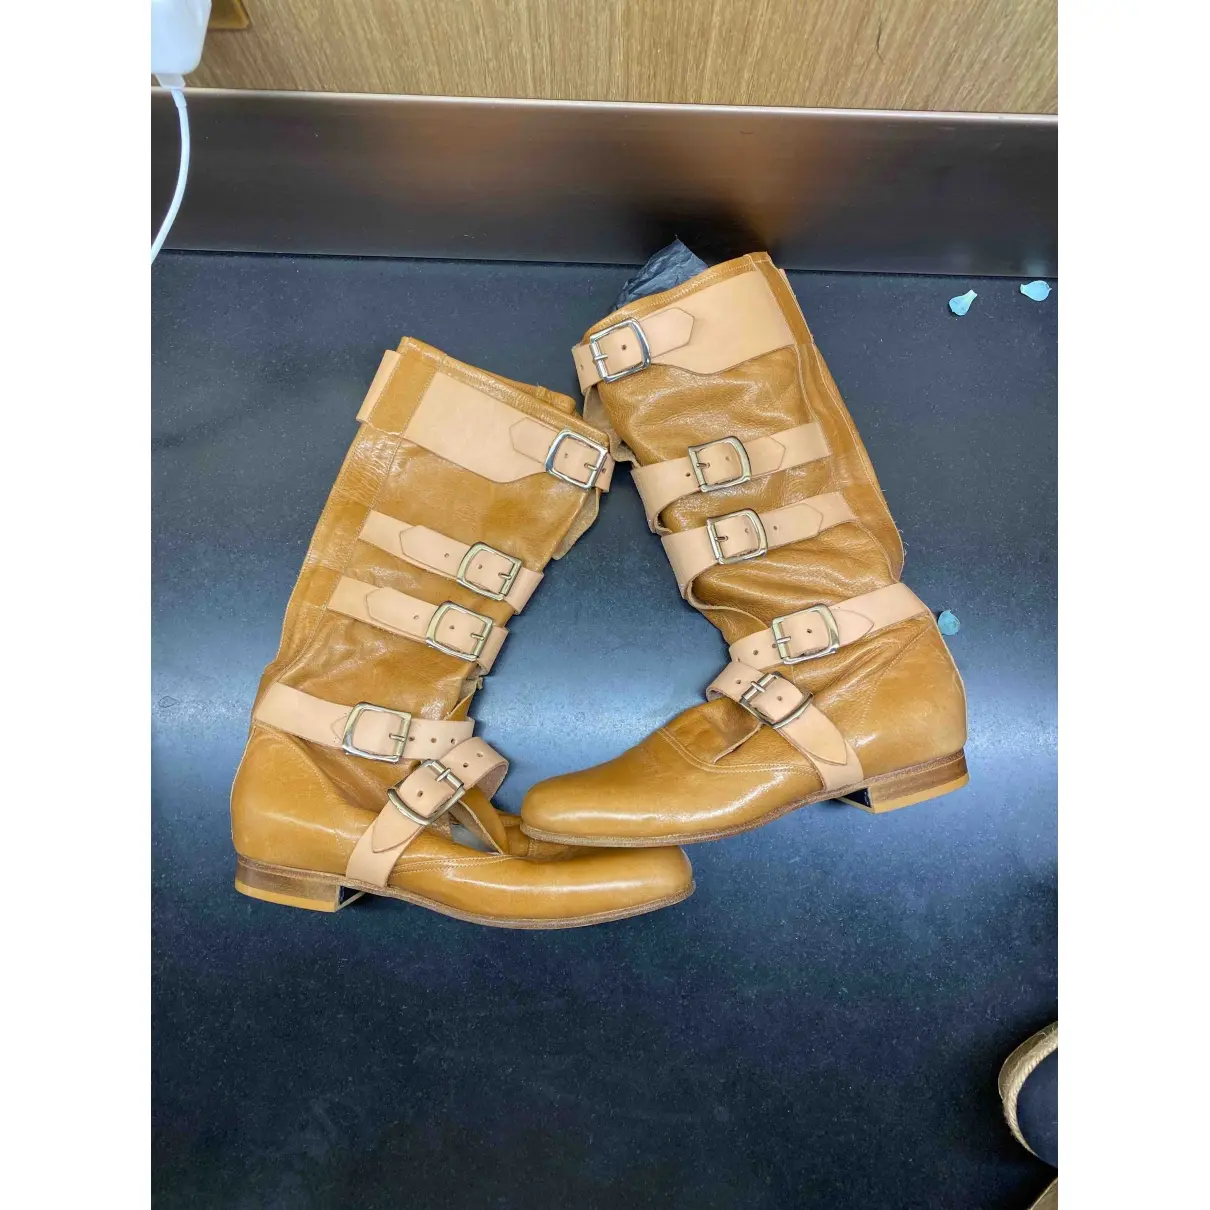 Vivienne Westwood Leather boots for sale